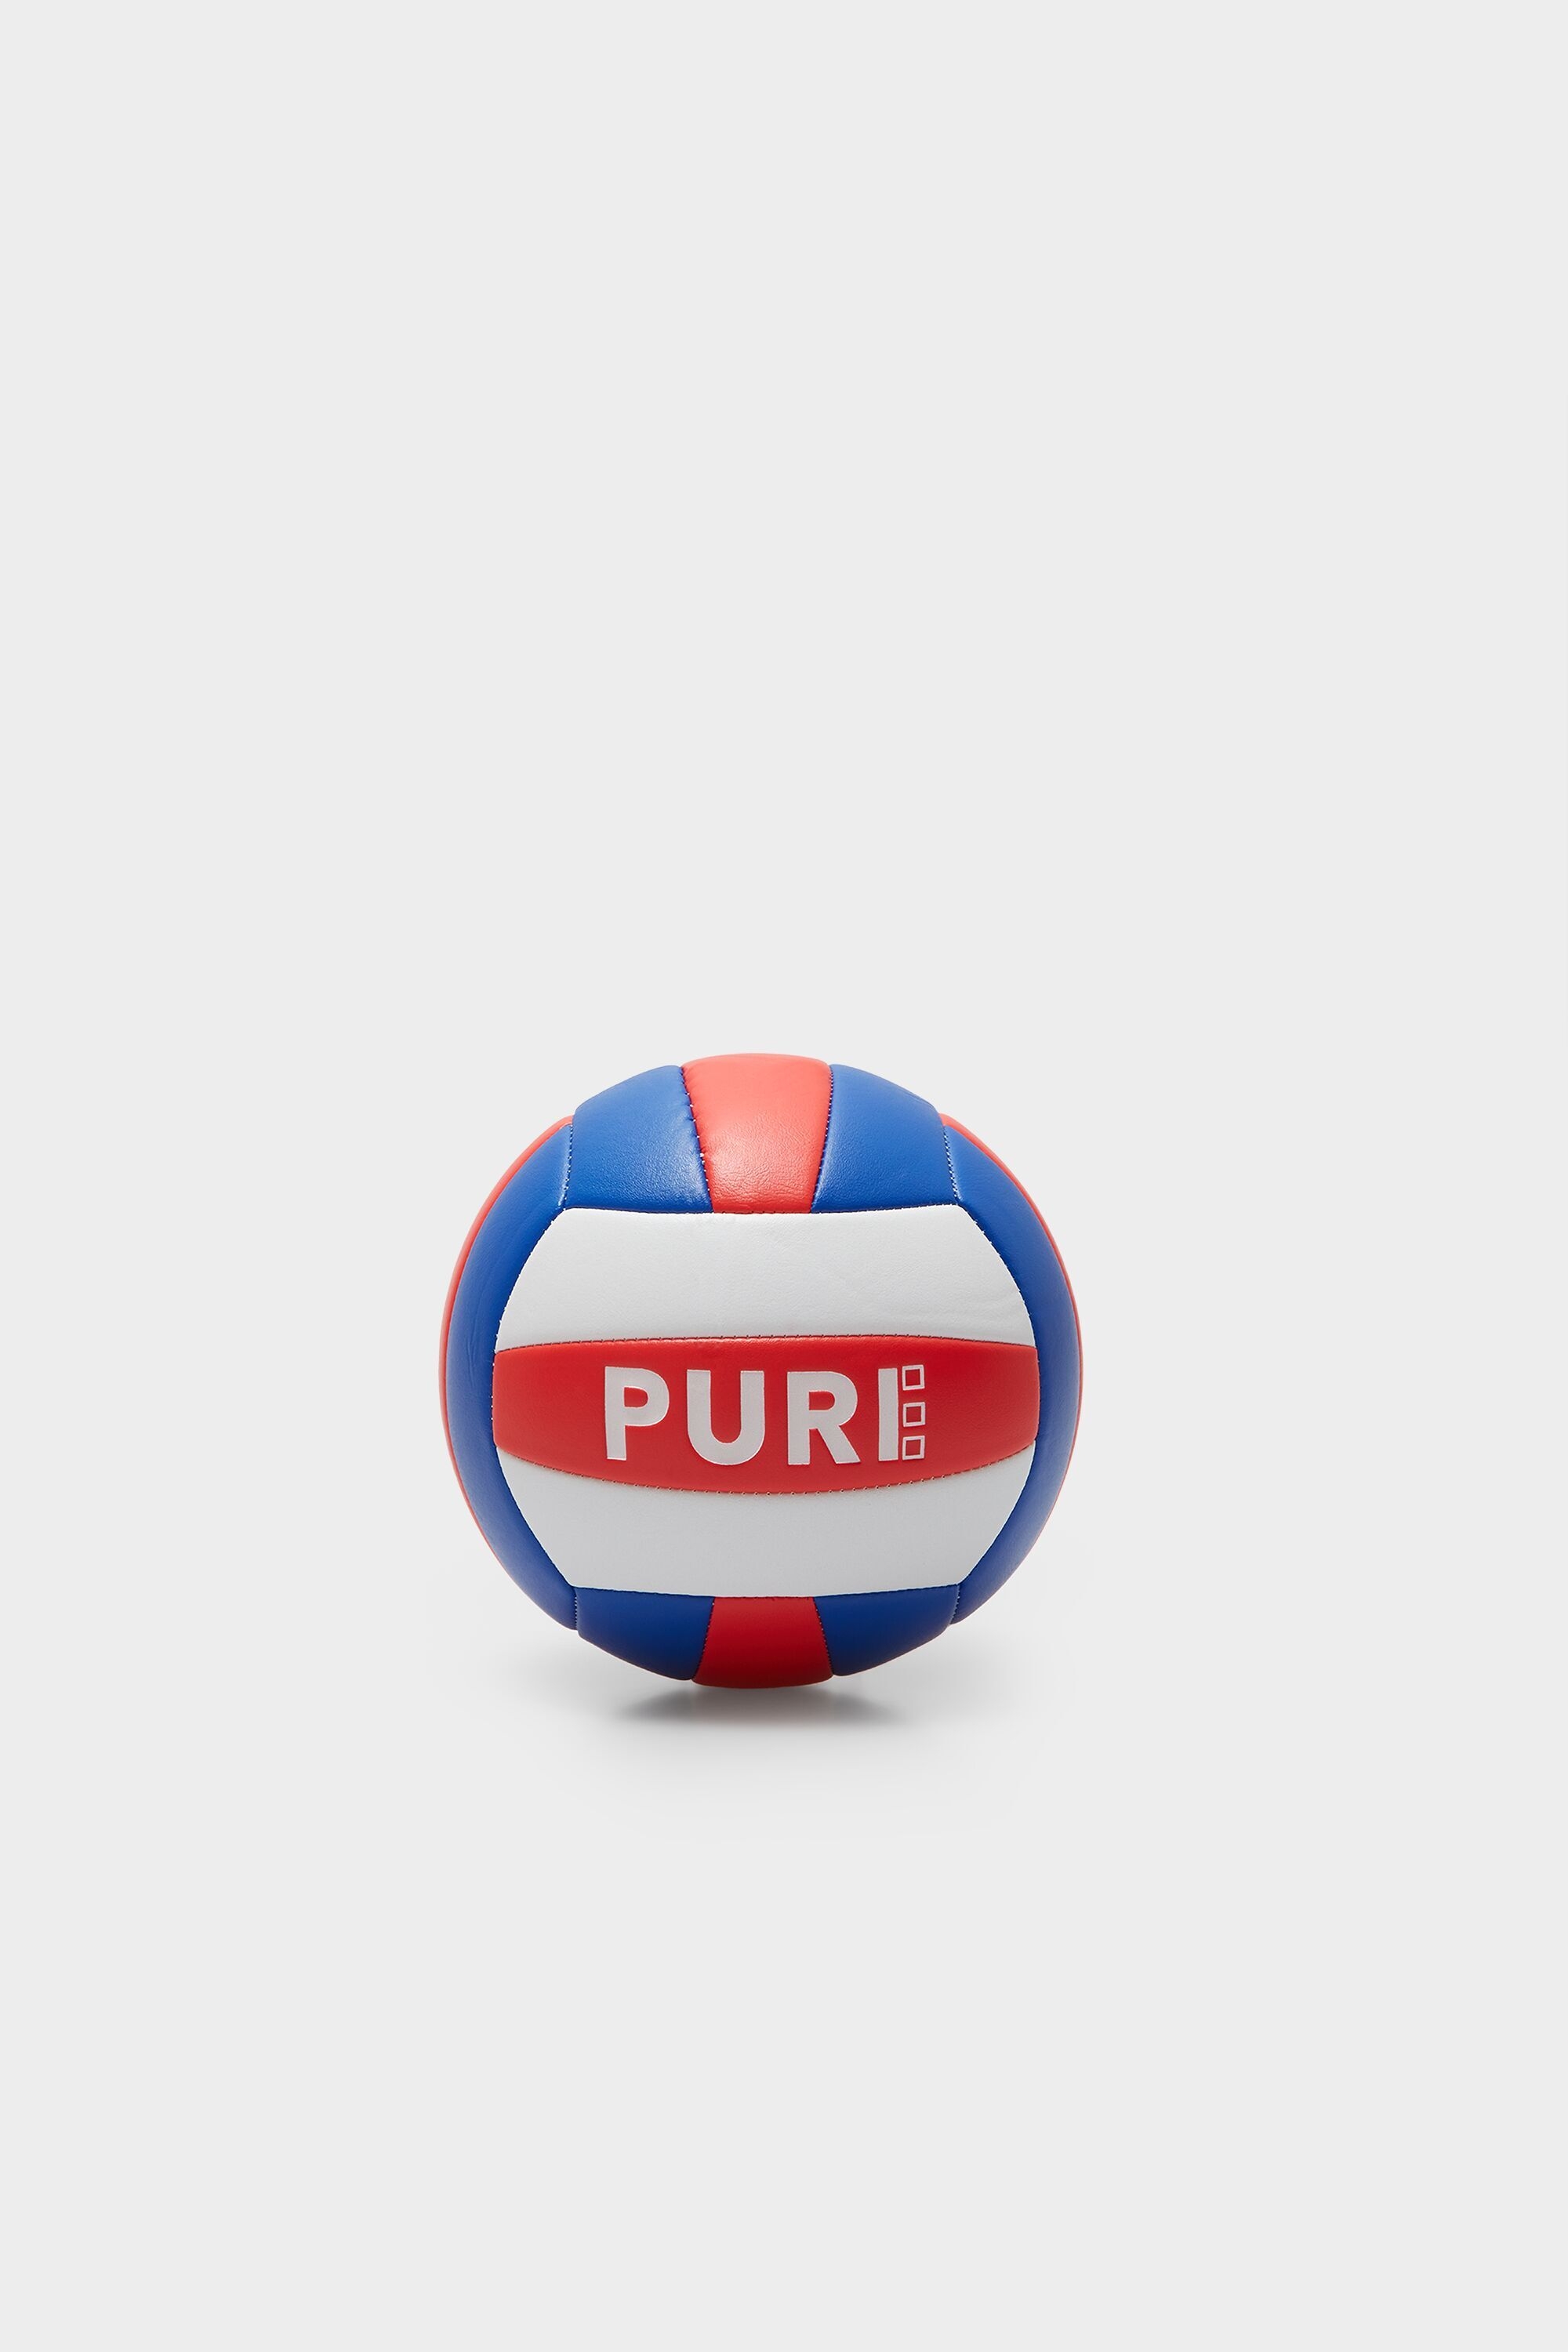 PURE volley ball